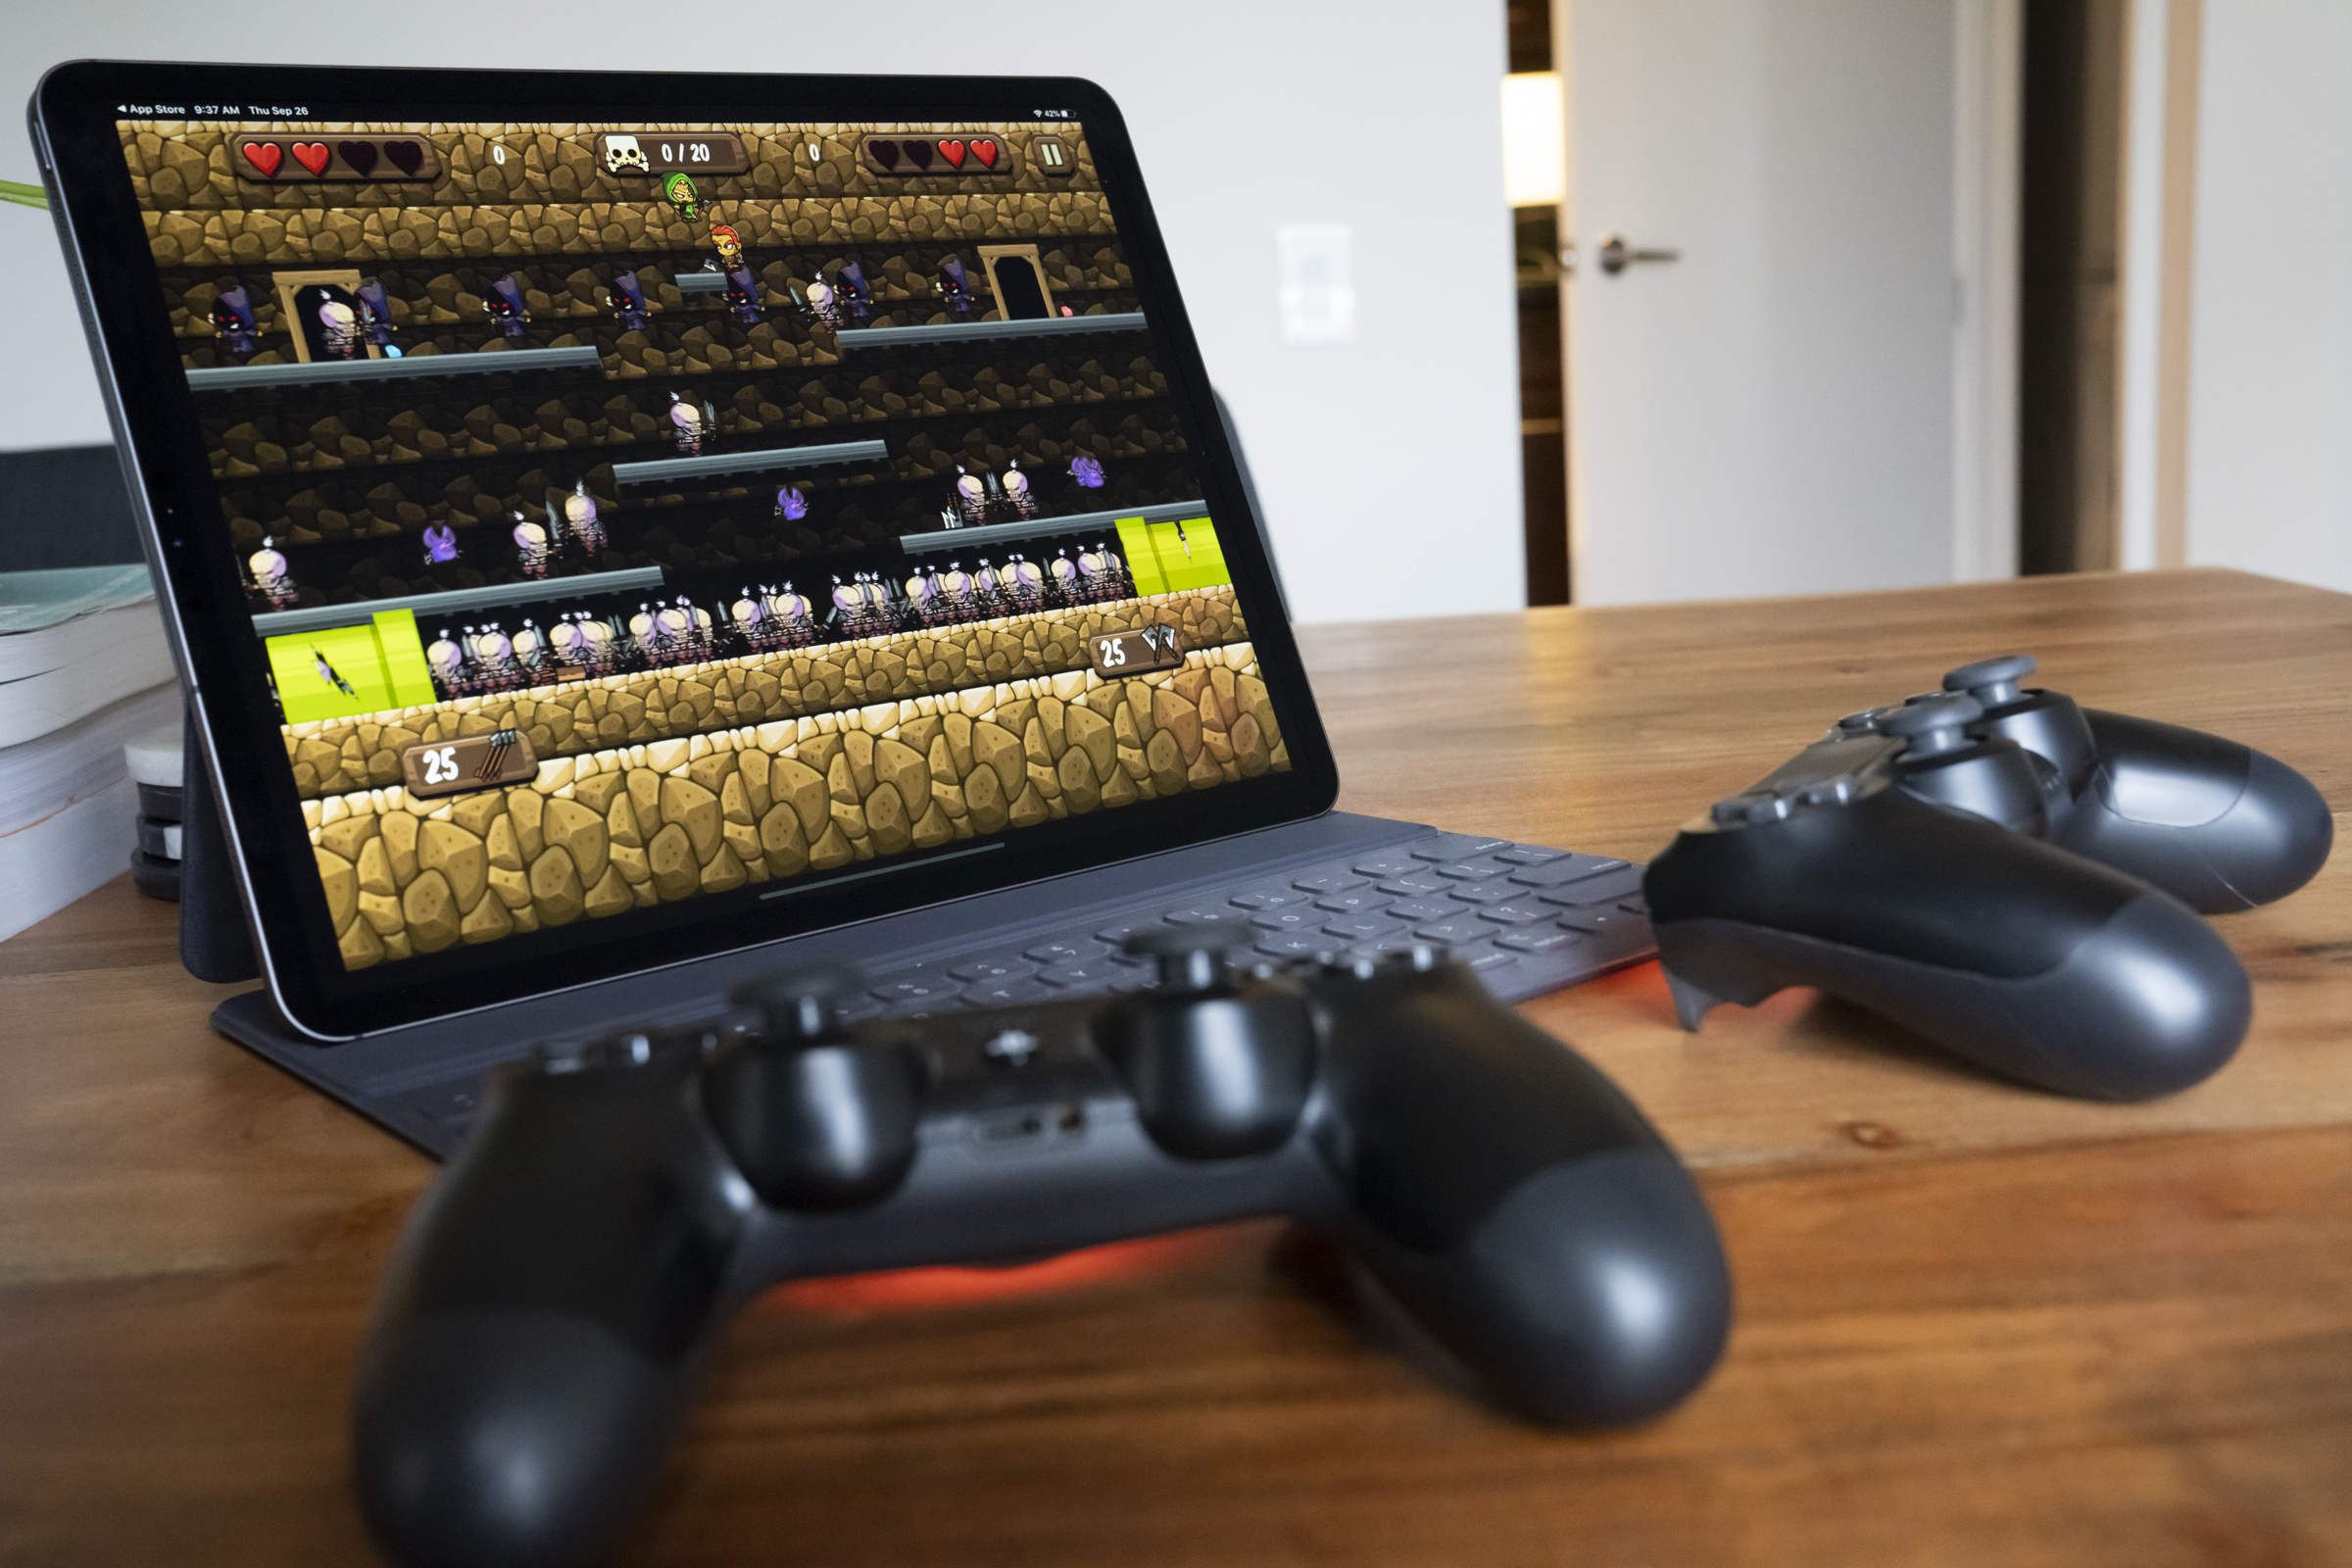 How to connect a second controller to an xbox one Apple S Ios And Ipados 13 Support Multiple Ps4 Or Xbox One Controllers Which Could Be Huge For Arcade Techcrunch